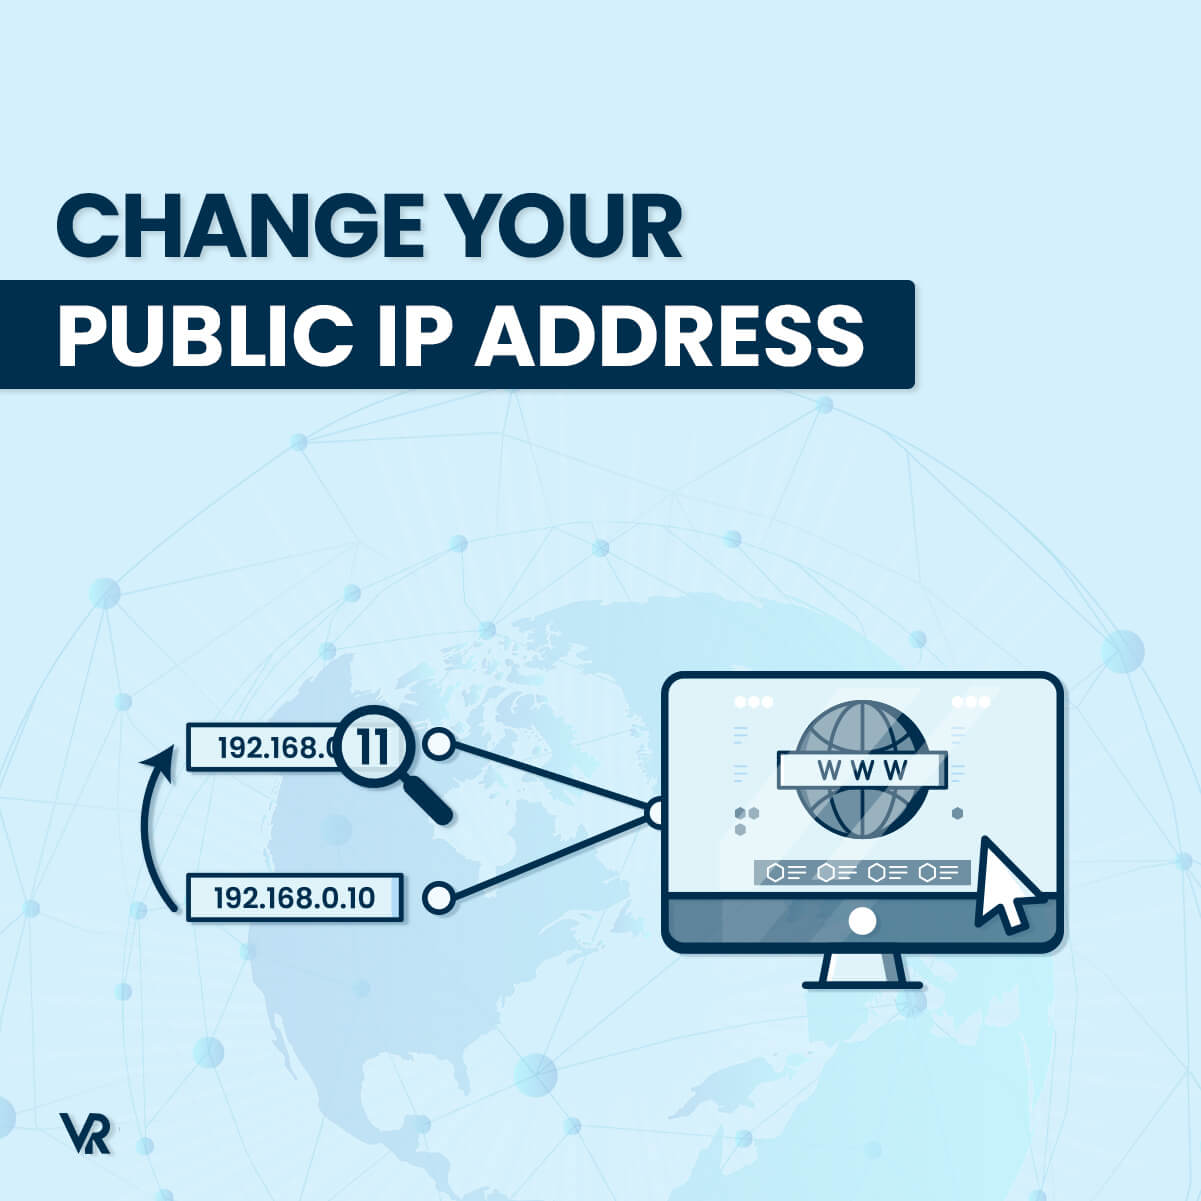 Change-your-public-ip-address-Featured